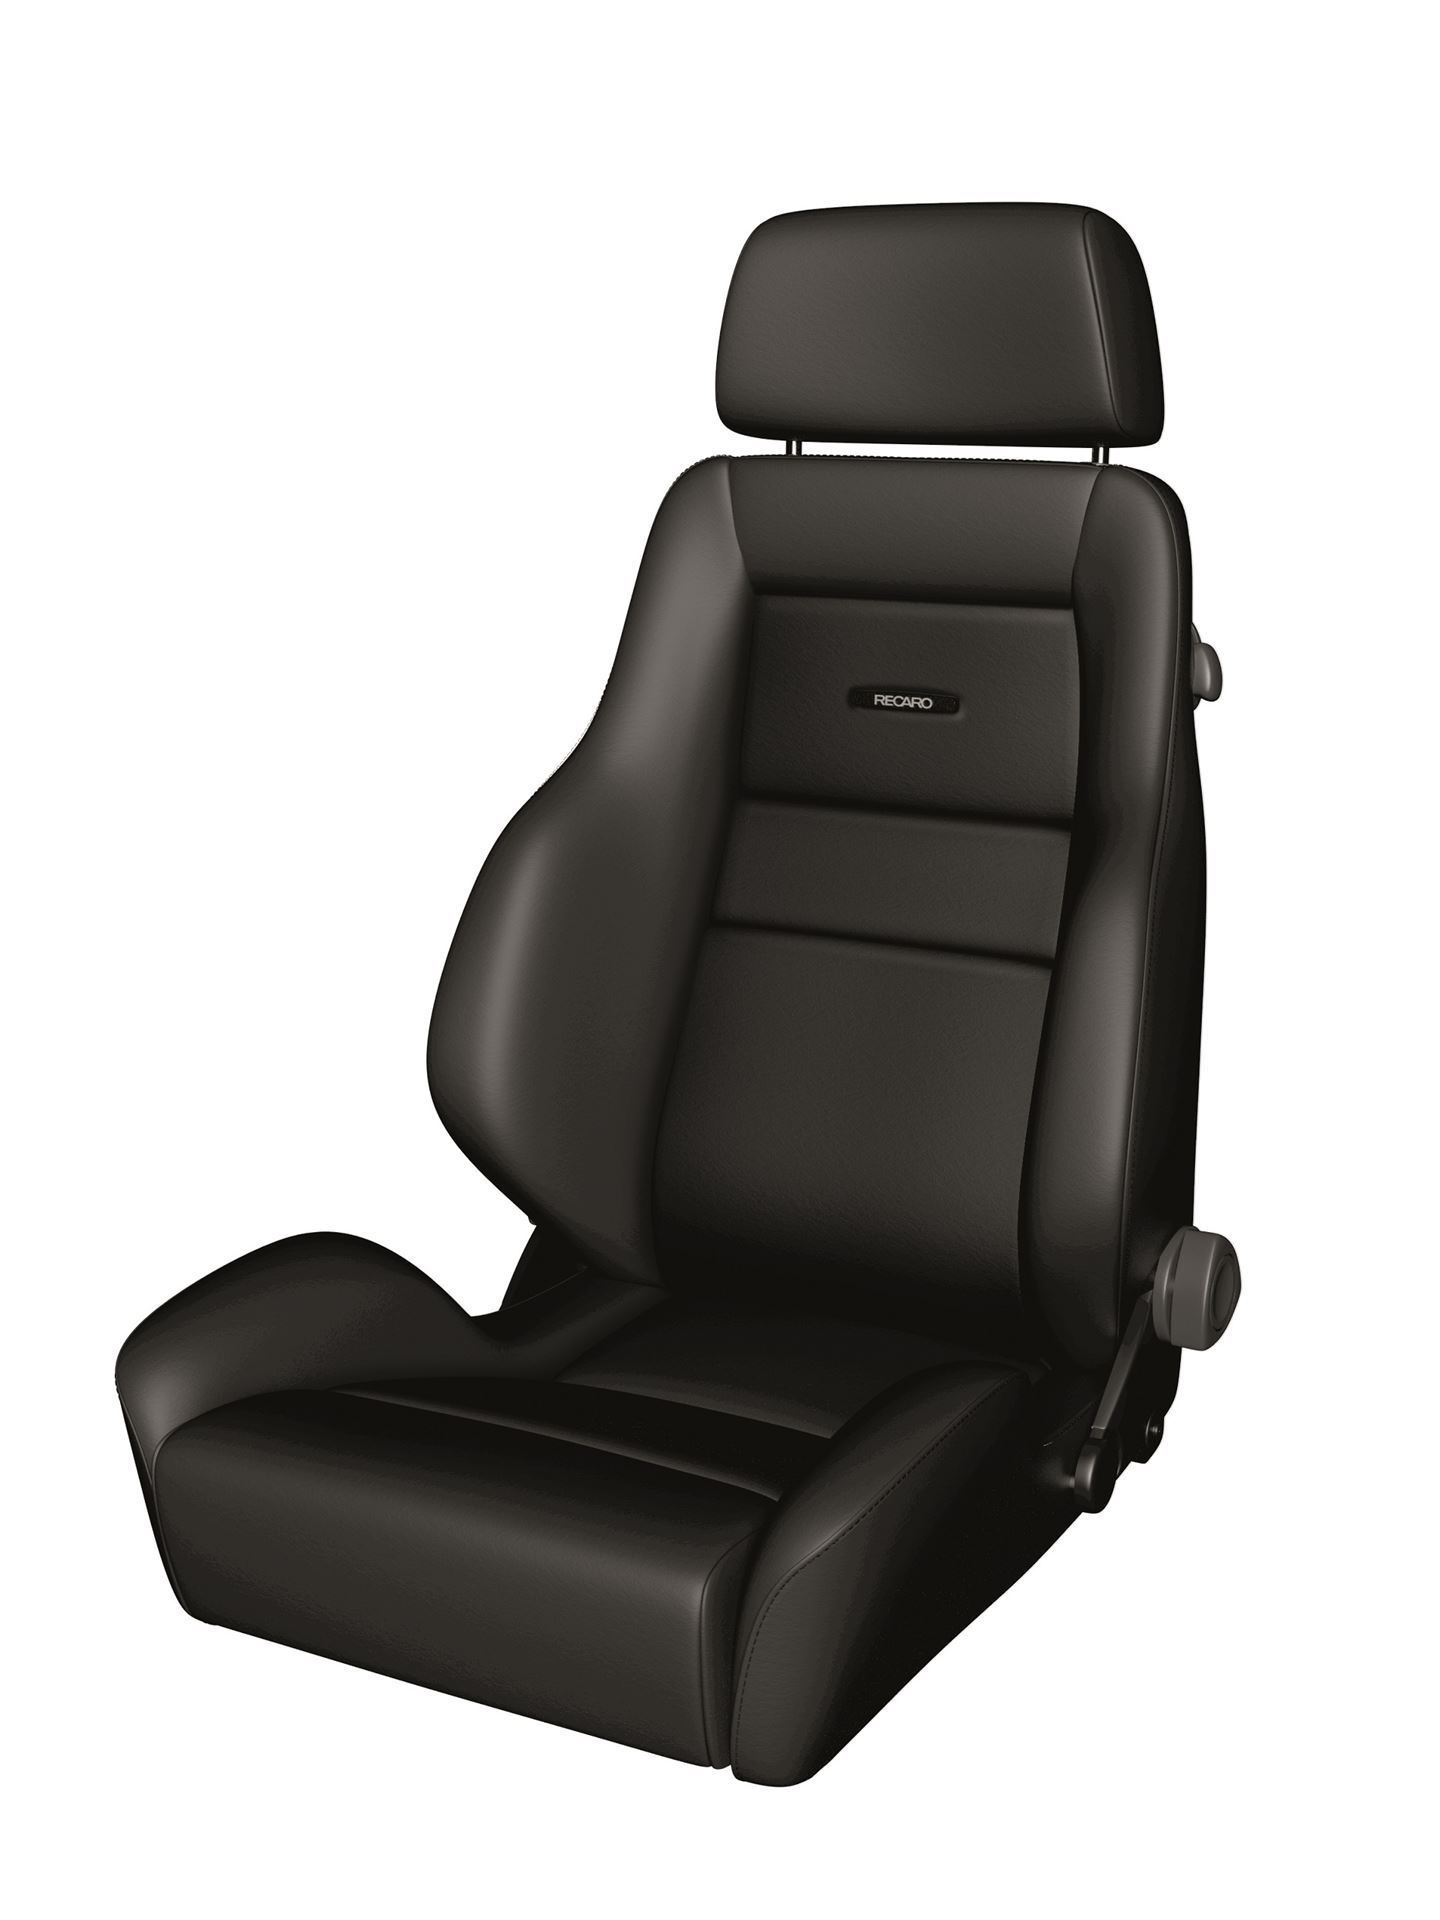 Capital Seating and Vision gt Seating Vision and Accessories for Hardworking Environments 